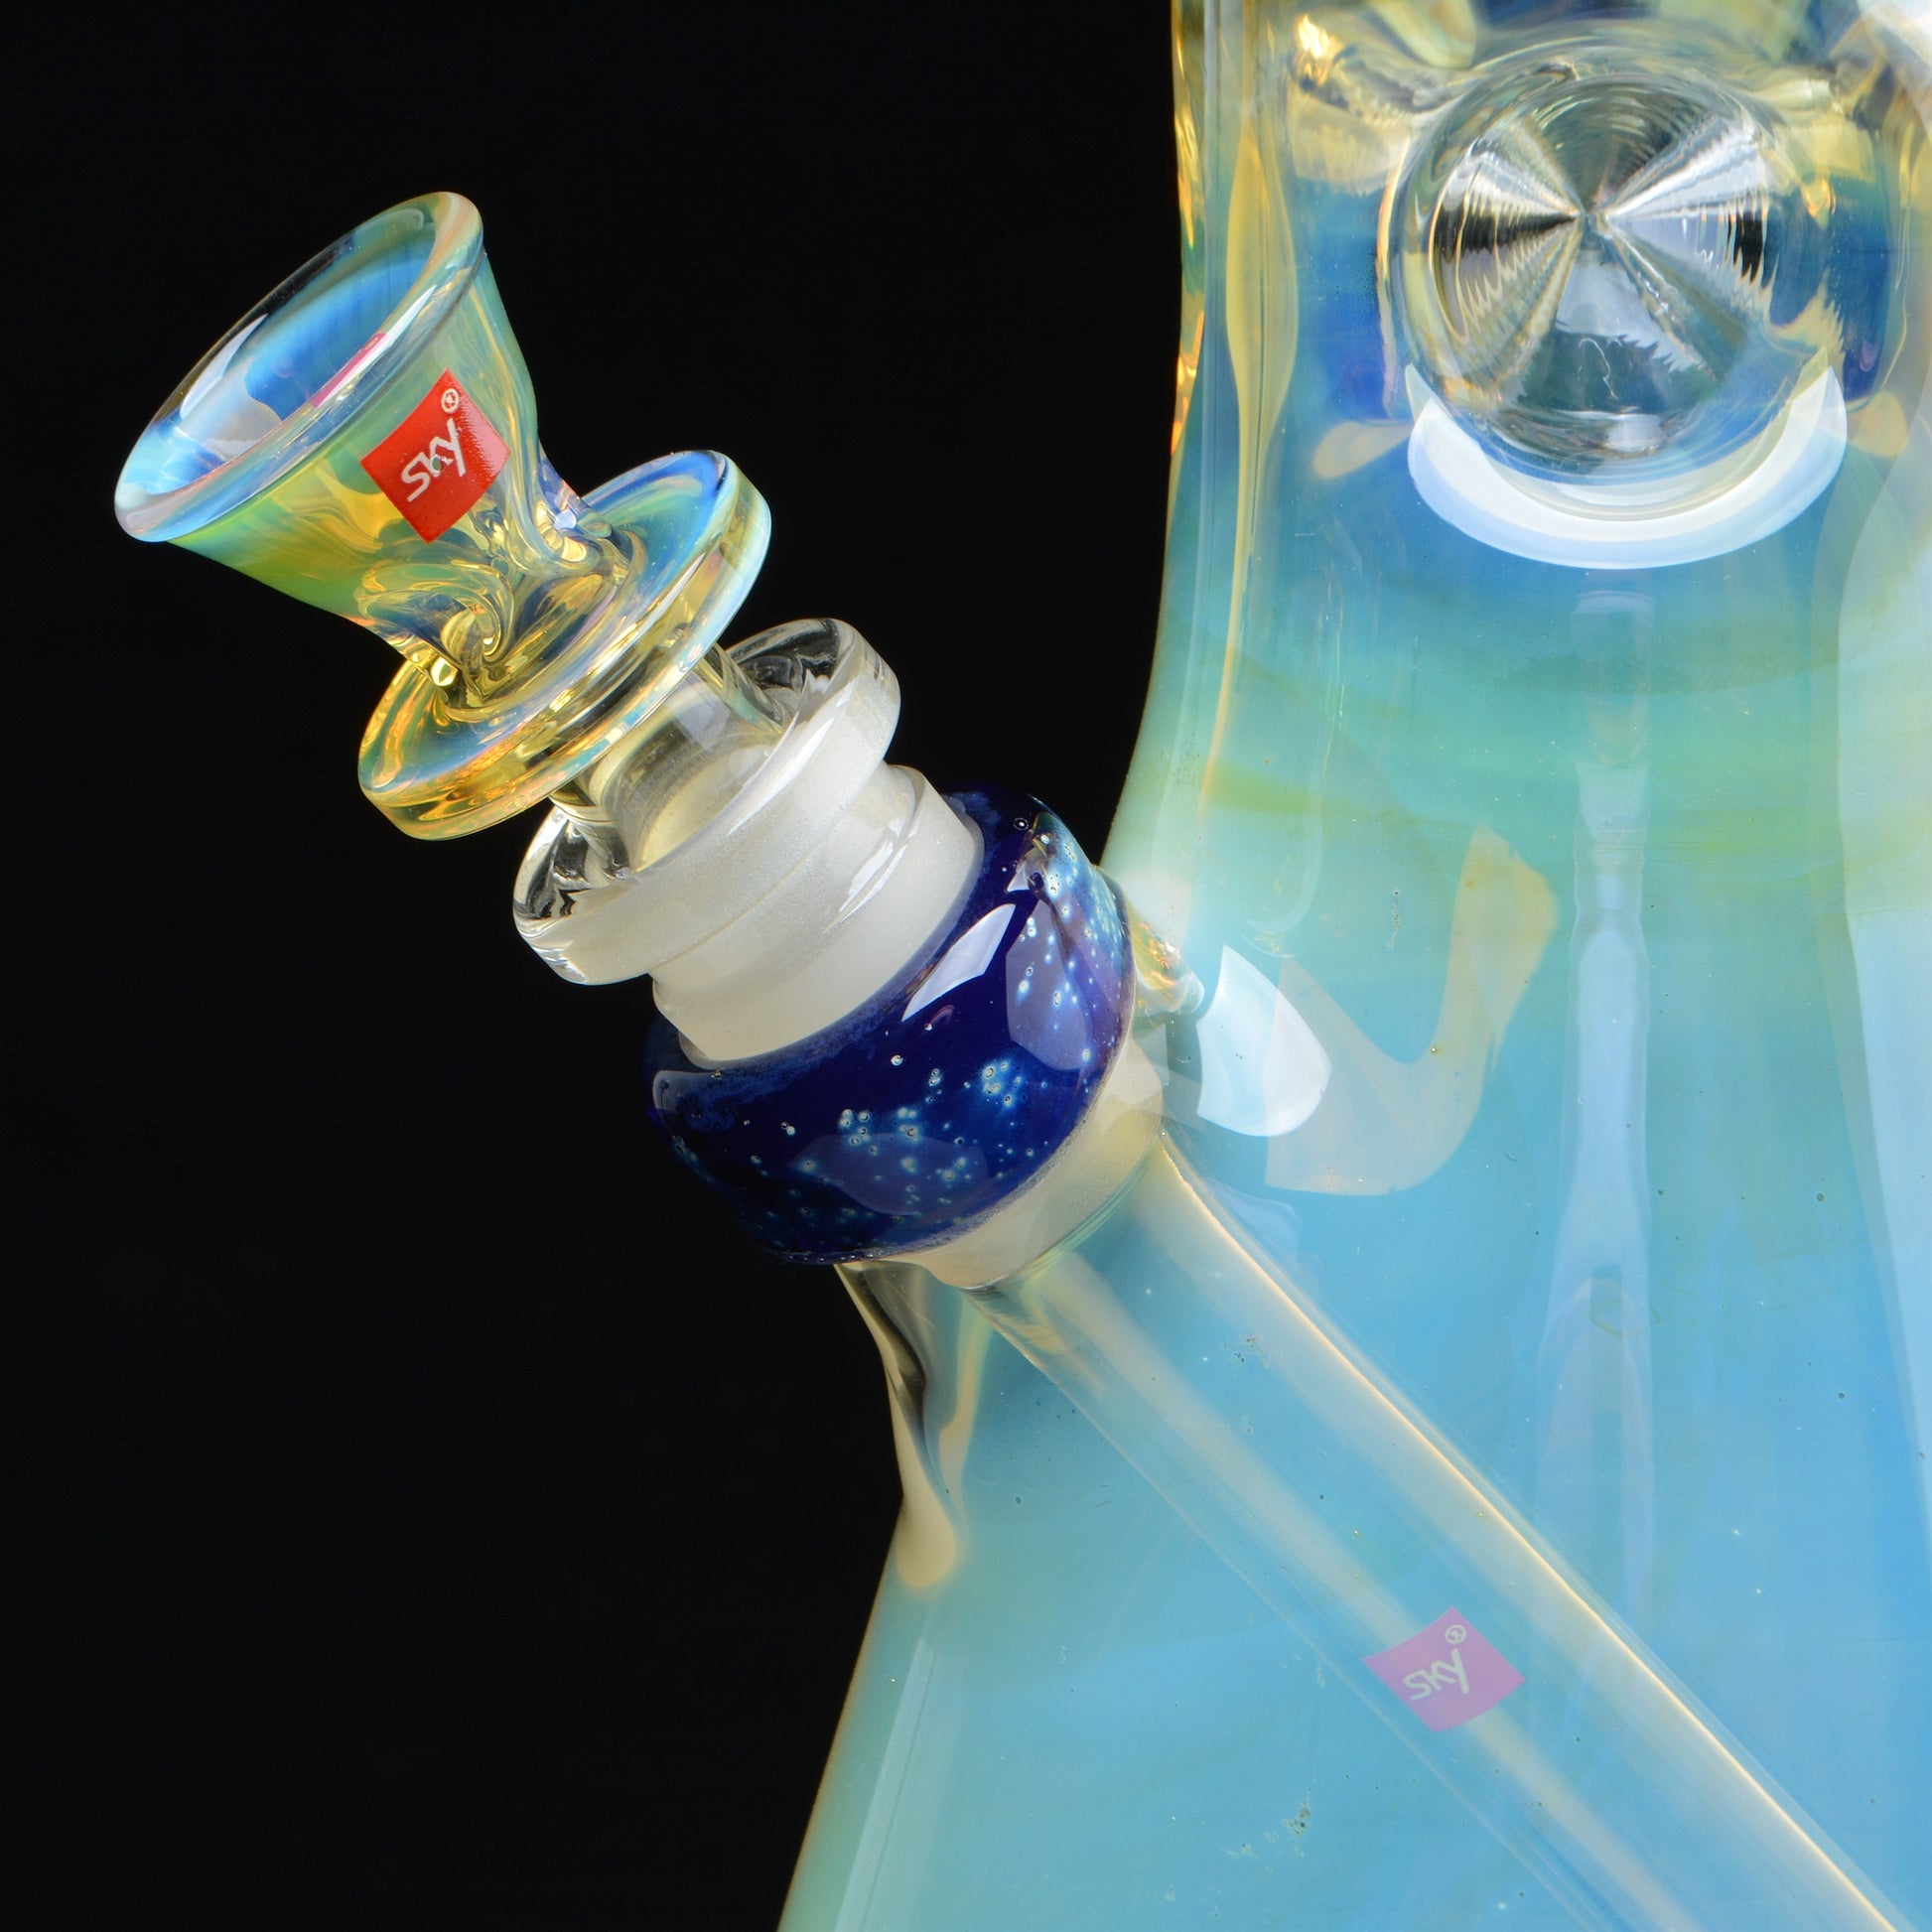 Close up shot of the Joint, Bowl Piece and downstem